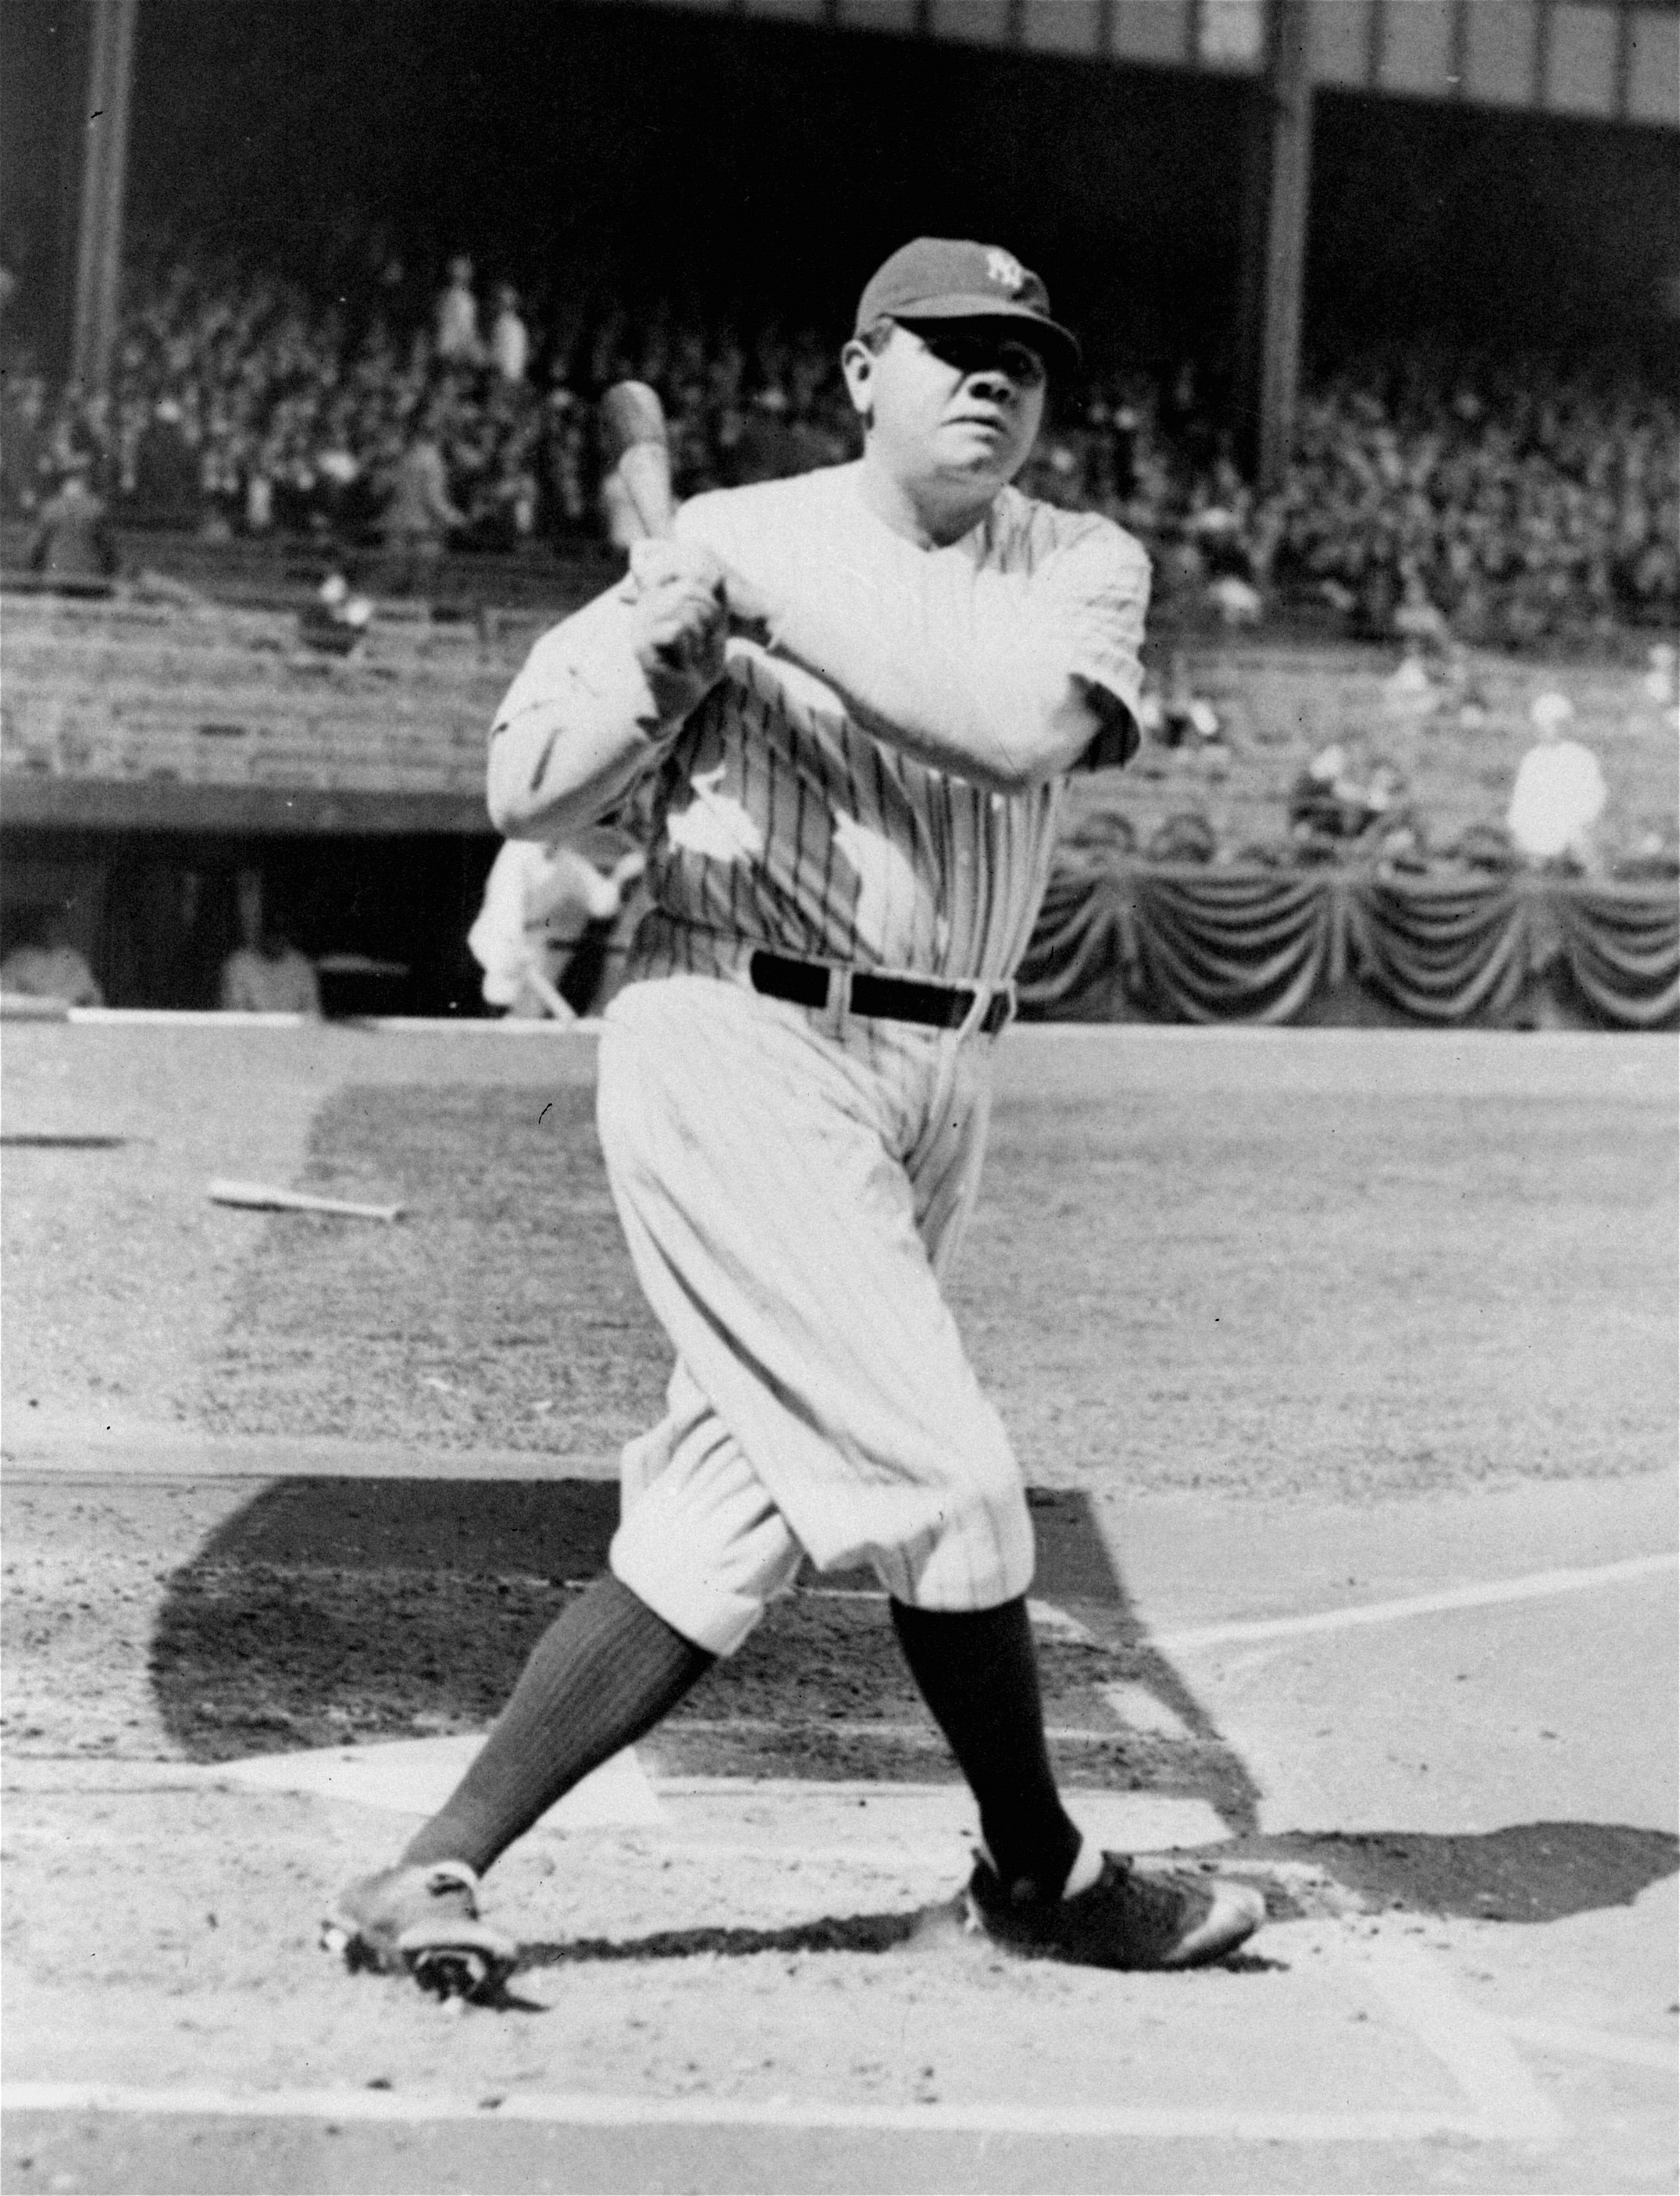 Babe Ruth played his last game 80 years ago today — in a different world